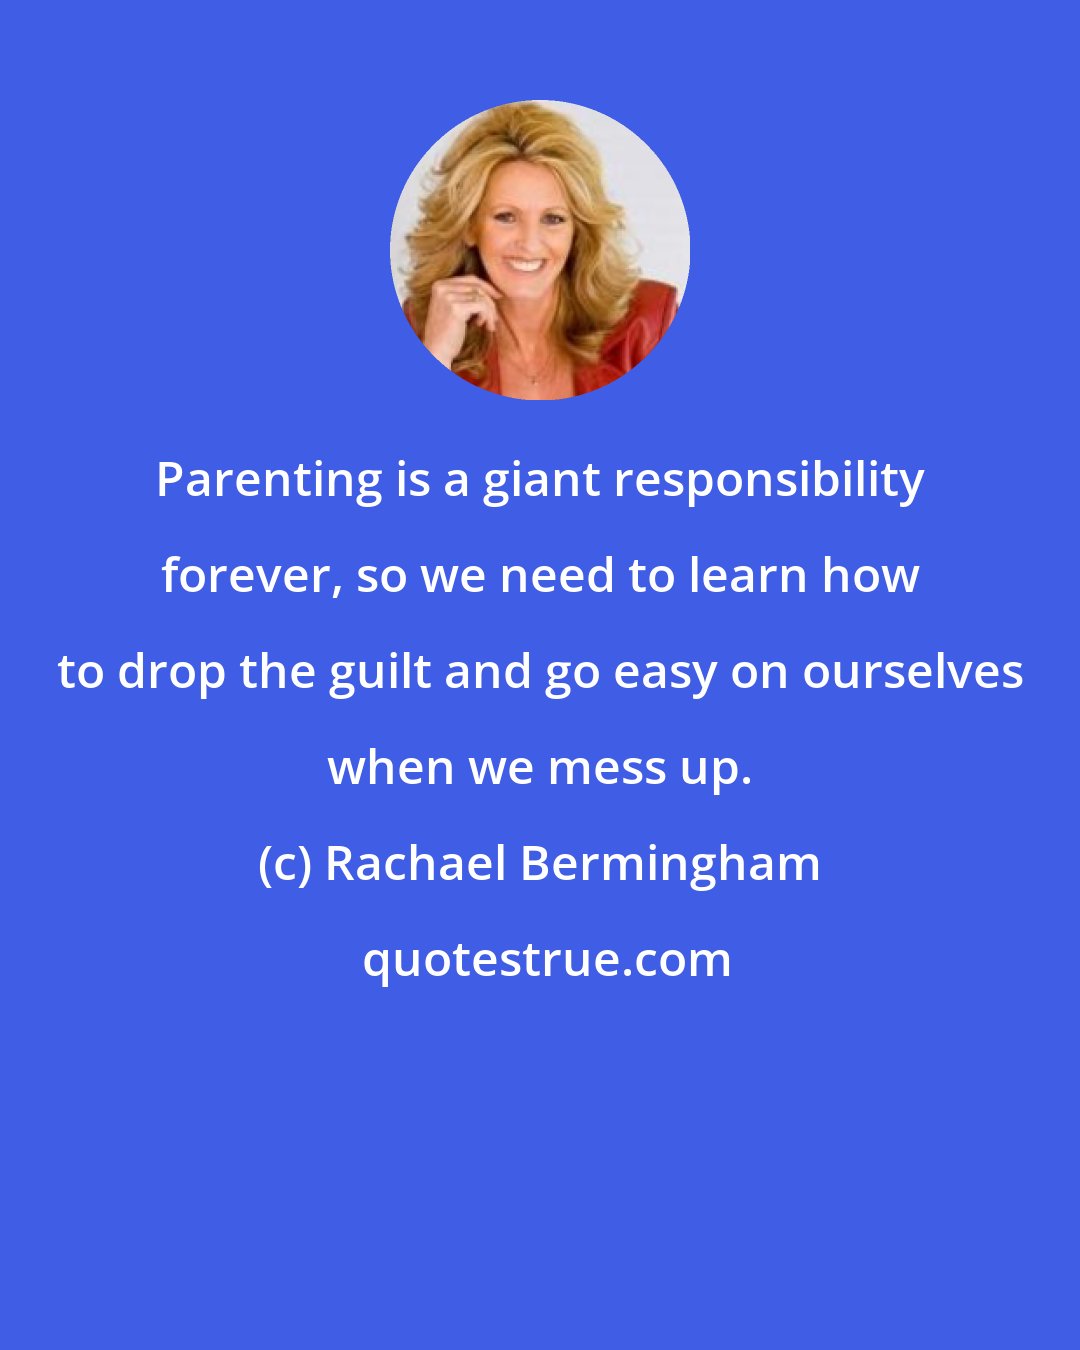 Rachael Bermingham: Parenting is a giant responsibility forever, so we need to learn how to drop the guilt and go easy on ourselves when we mess up.